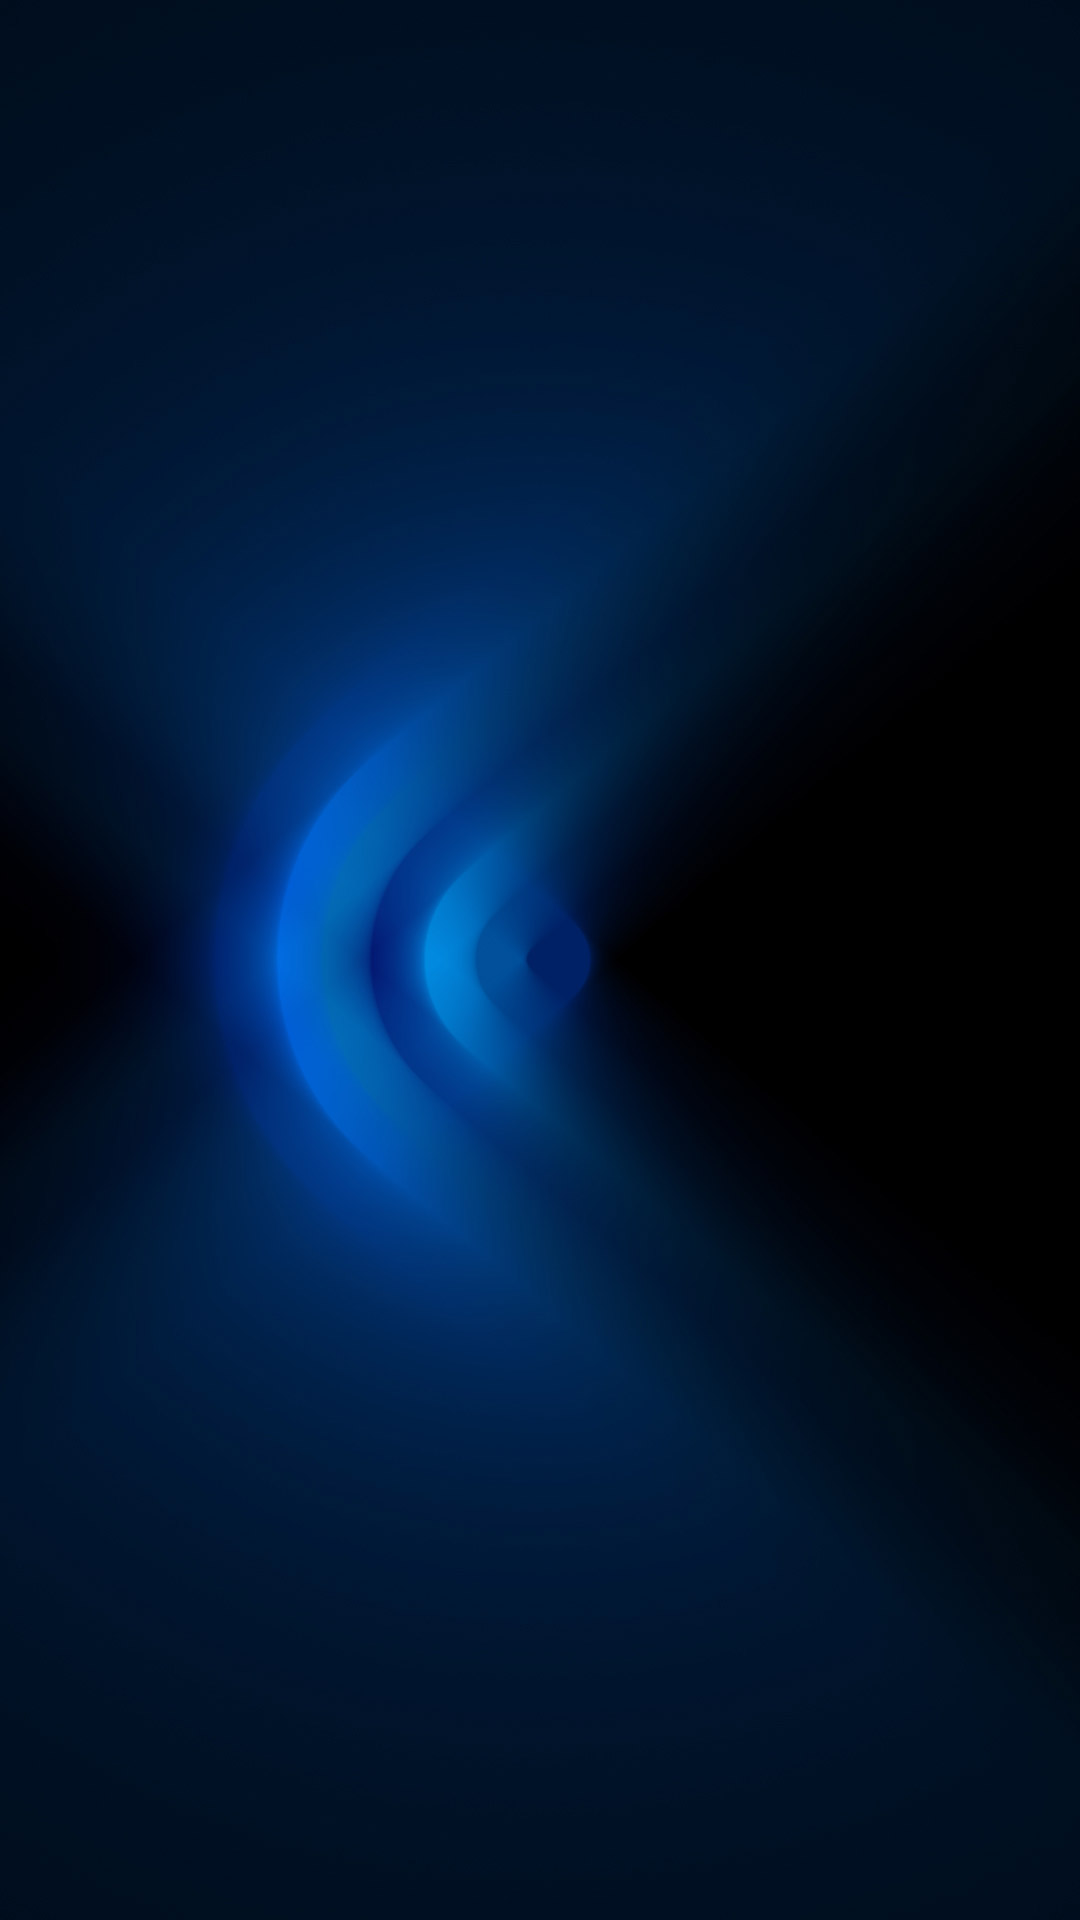 black and blue wallpaper iphone